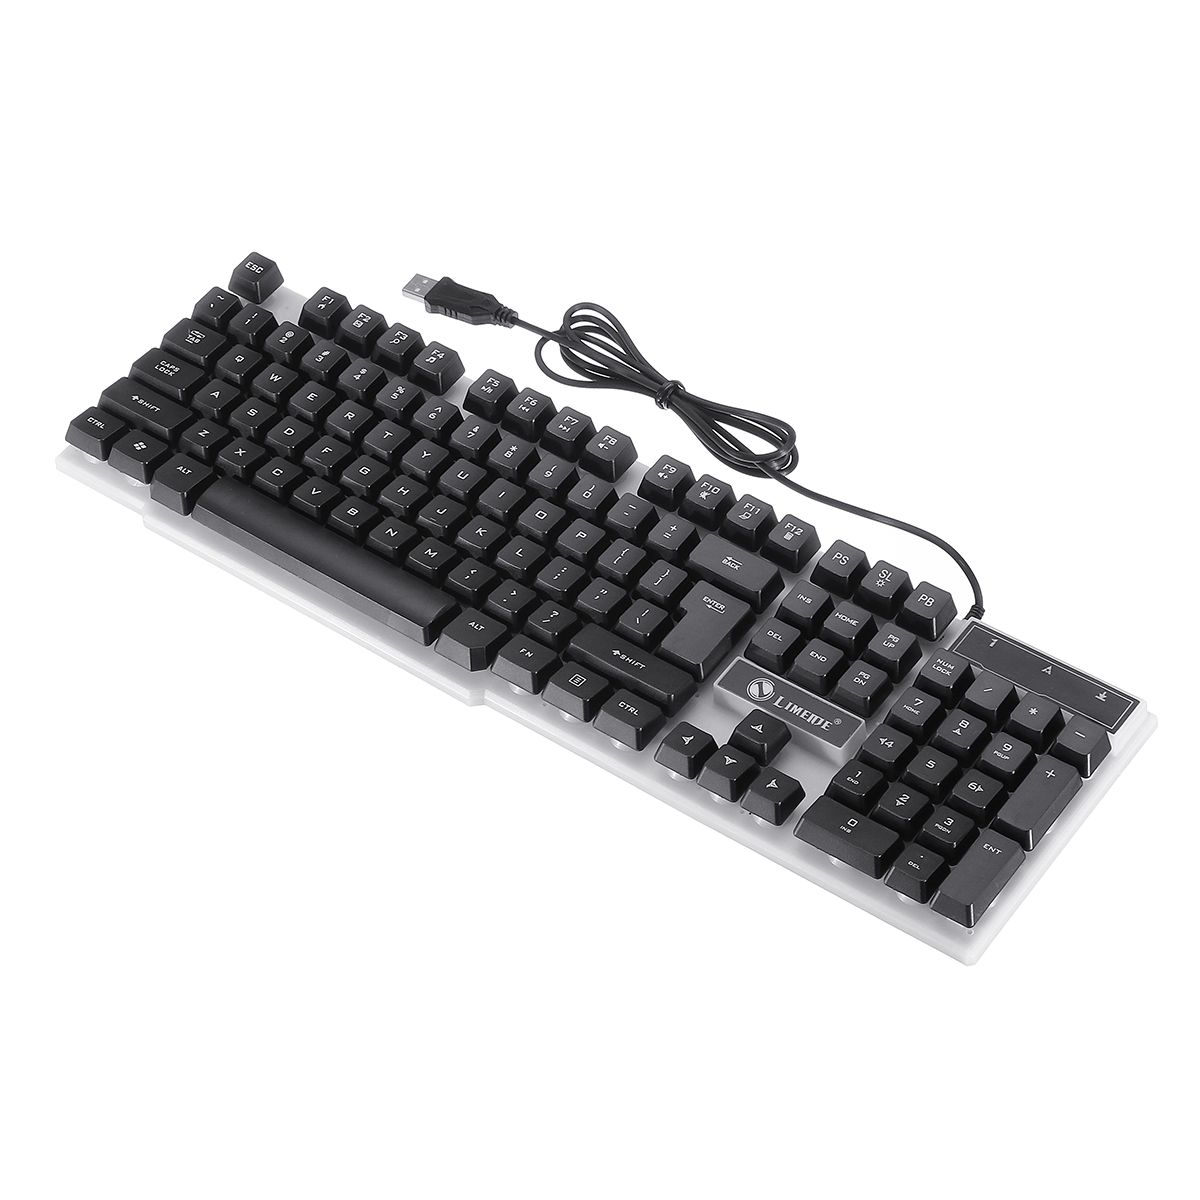 GTX300 104 Keys RGB Backlight Superthin Gaming Keyboard and 2.4GHZ 1200DPI 3 buttons USB Optical Gaming Mouse 6